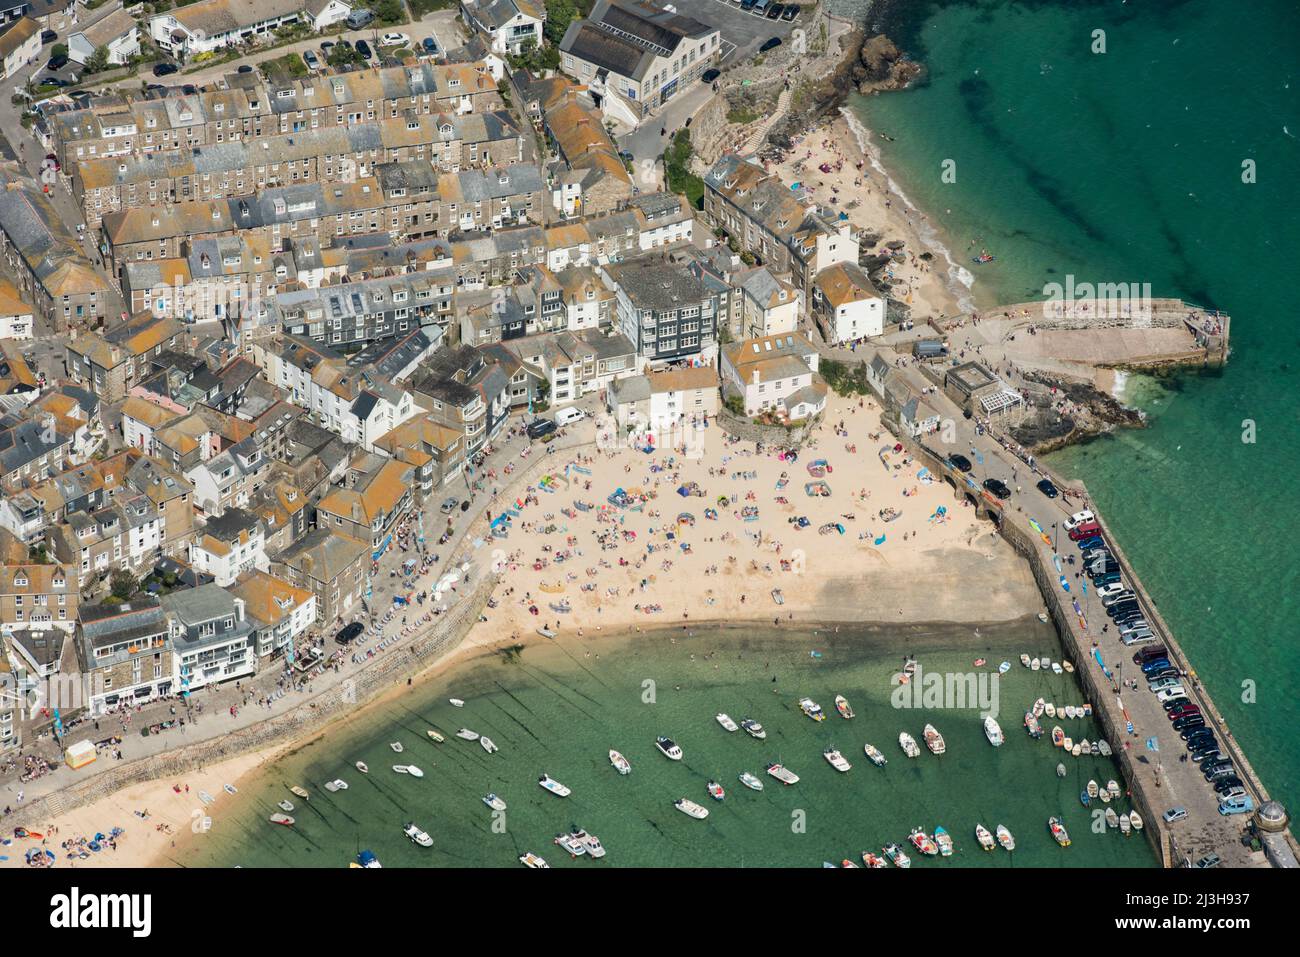 The town, beach and harbour, St Ives, Cornwall, 2016. Stock Photo